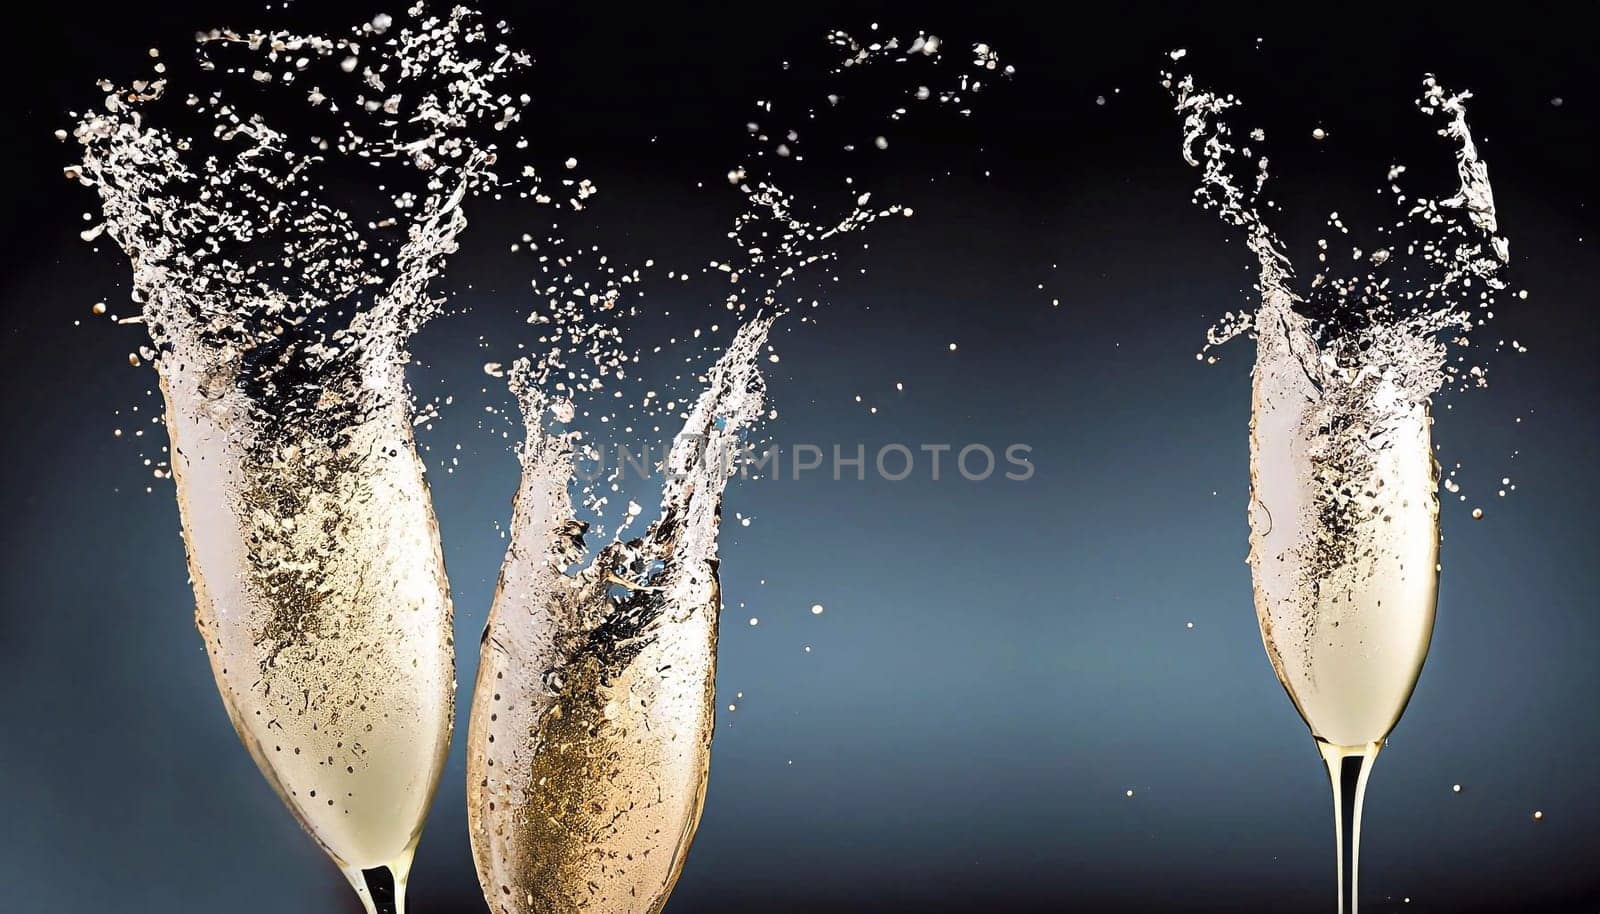 Splashes, Background, Champagne, Network, Jumpy, Generated, Image, Photorealistic, Bottle by dec925